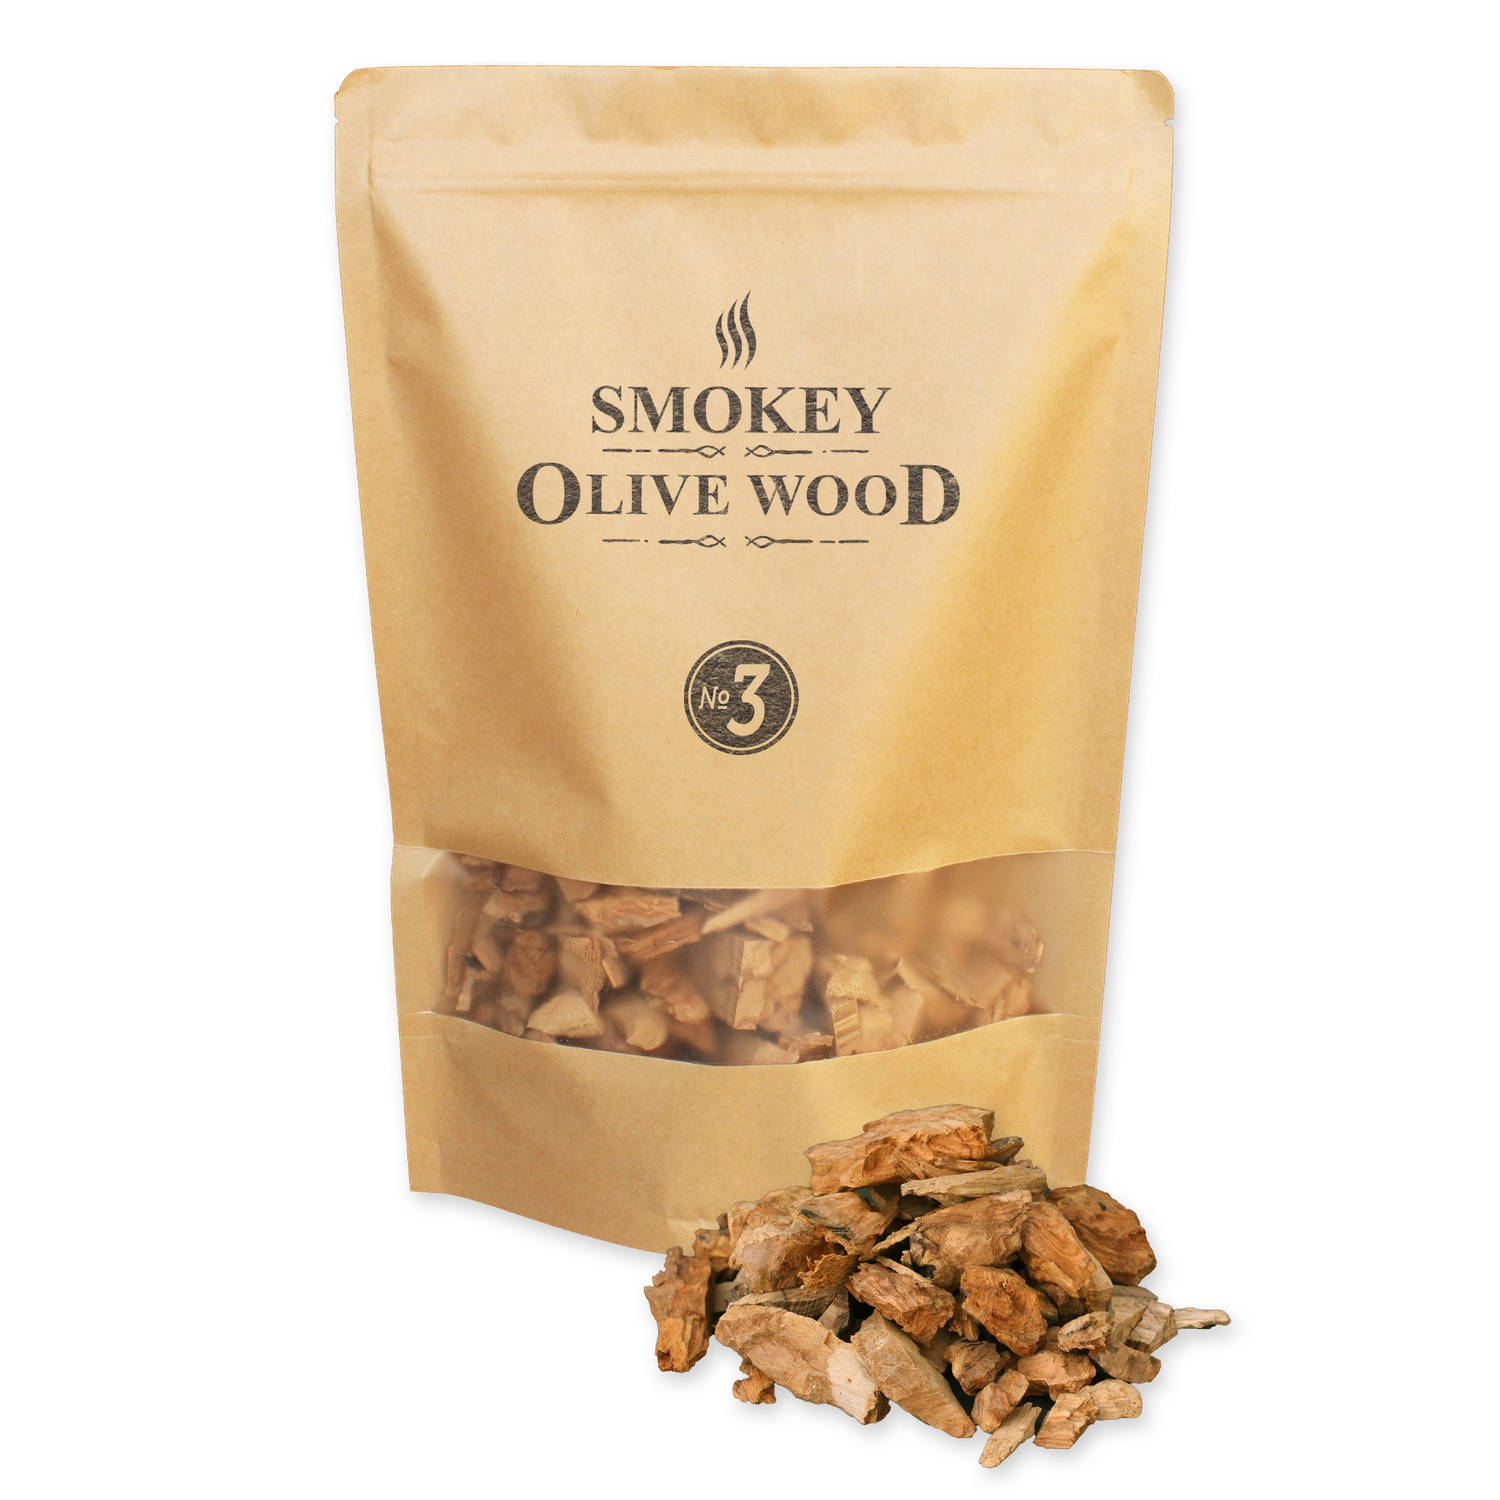 Smokey Olive Wood - Houtsnippers - 1,7L - Olijfhout -  Chips grote maat ø 2cm-3cm